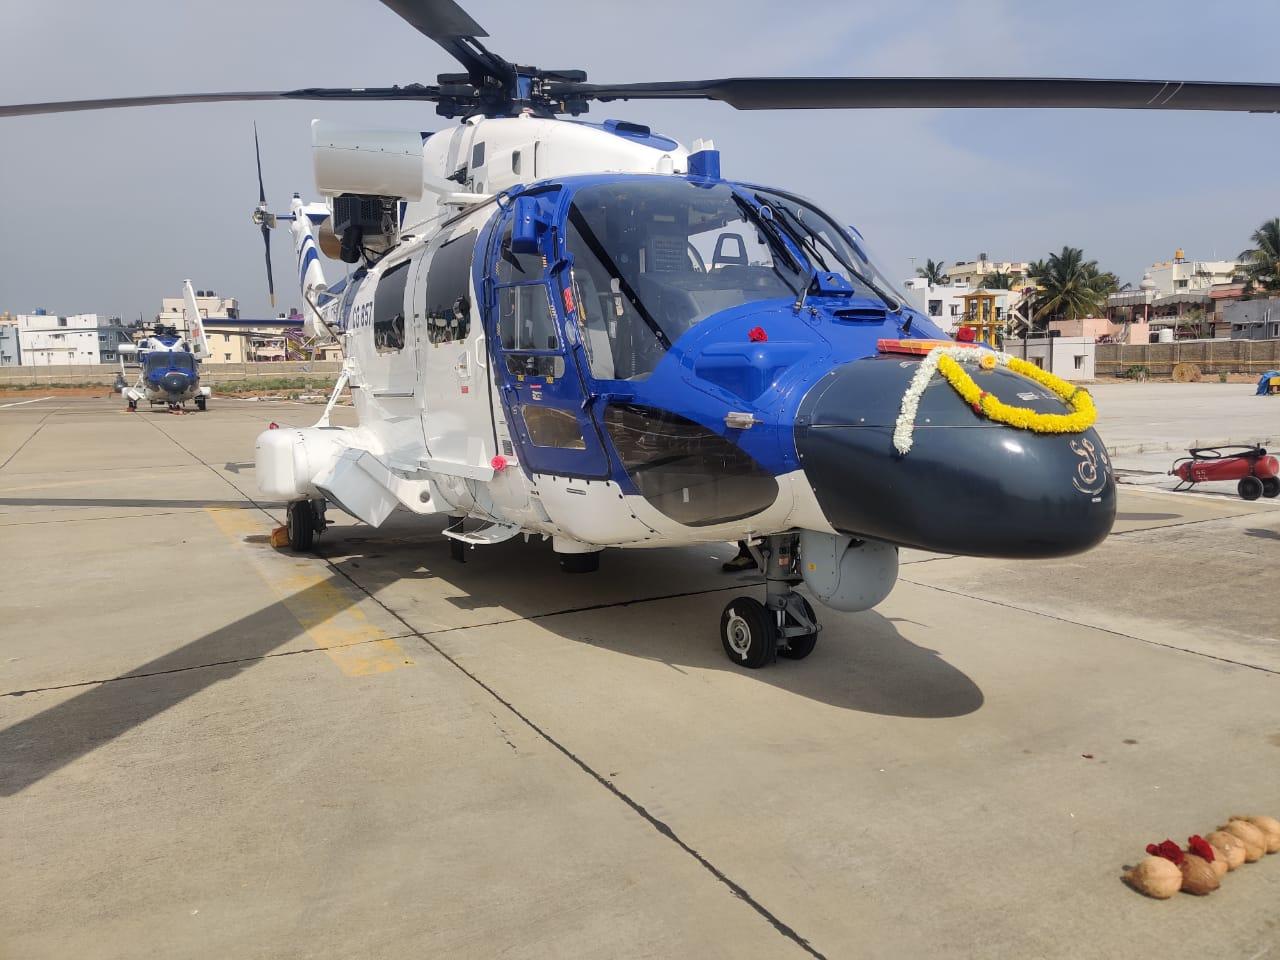 Indian state-owned airframer HAL has inked a contract with the Govt. of Mauritius (GoM) for supply of one Dhruv helicopter.